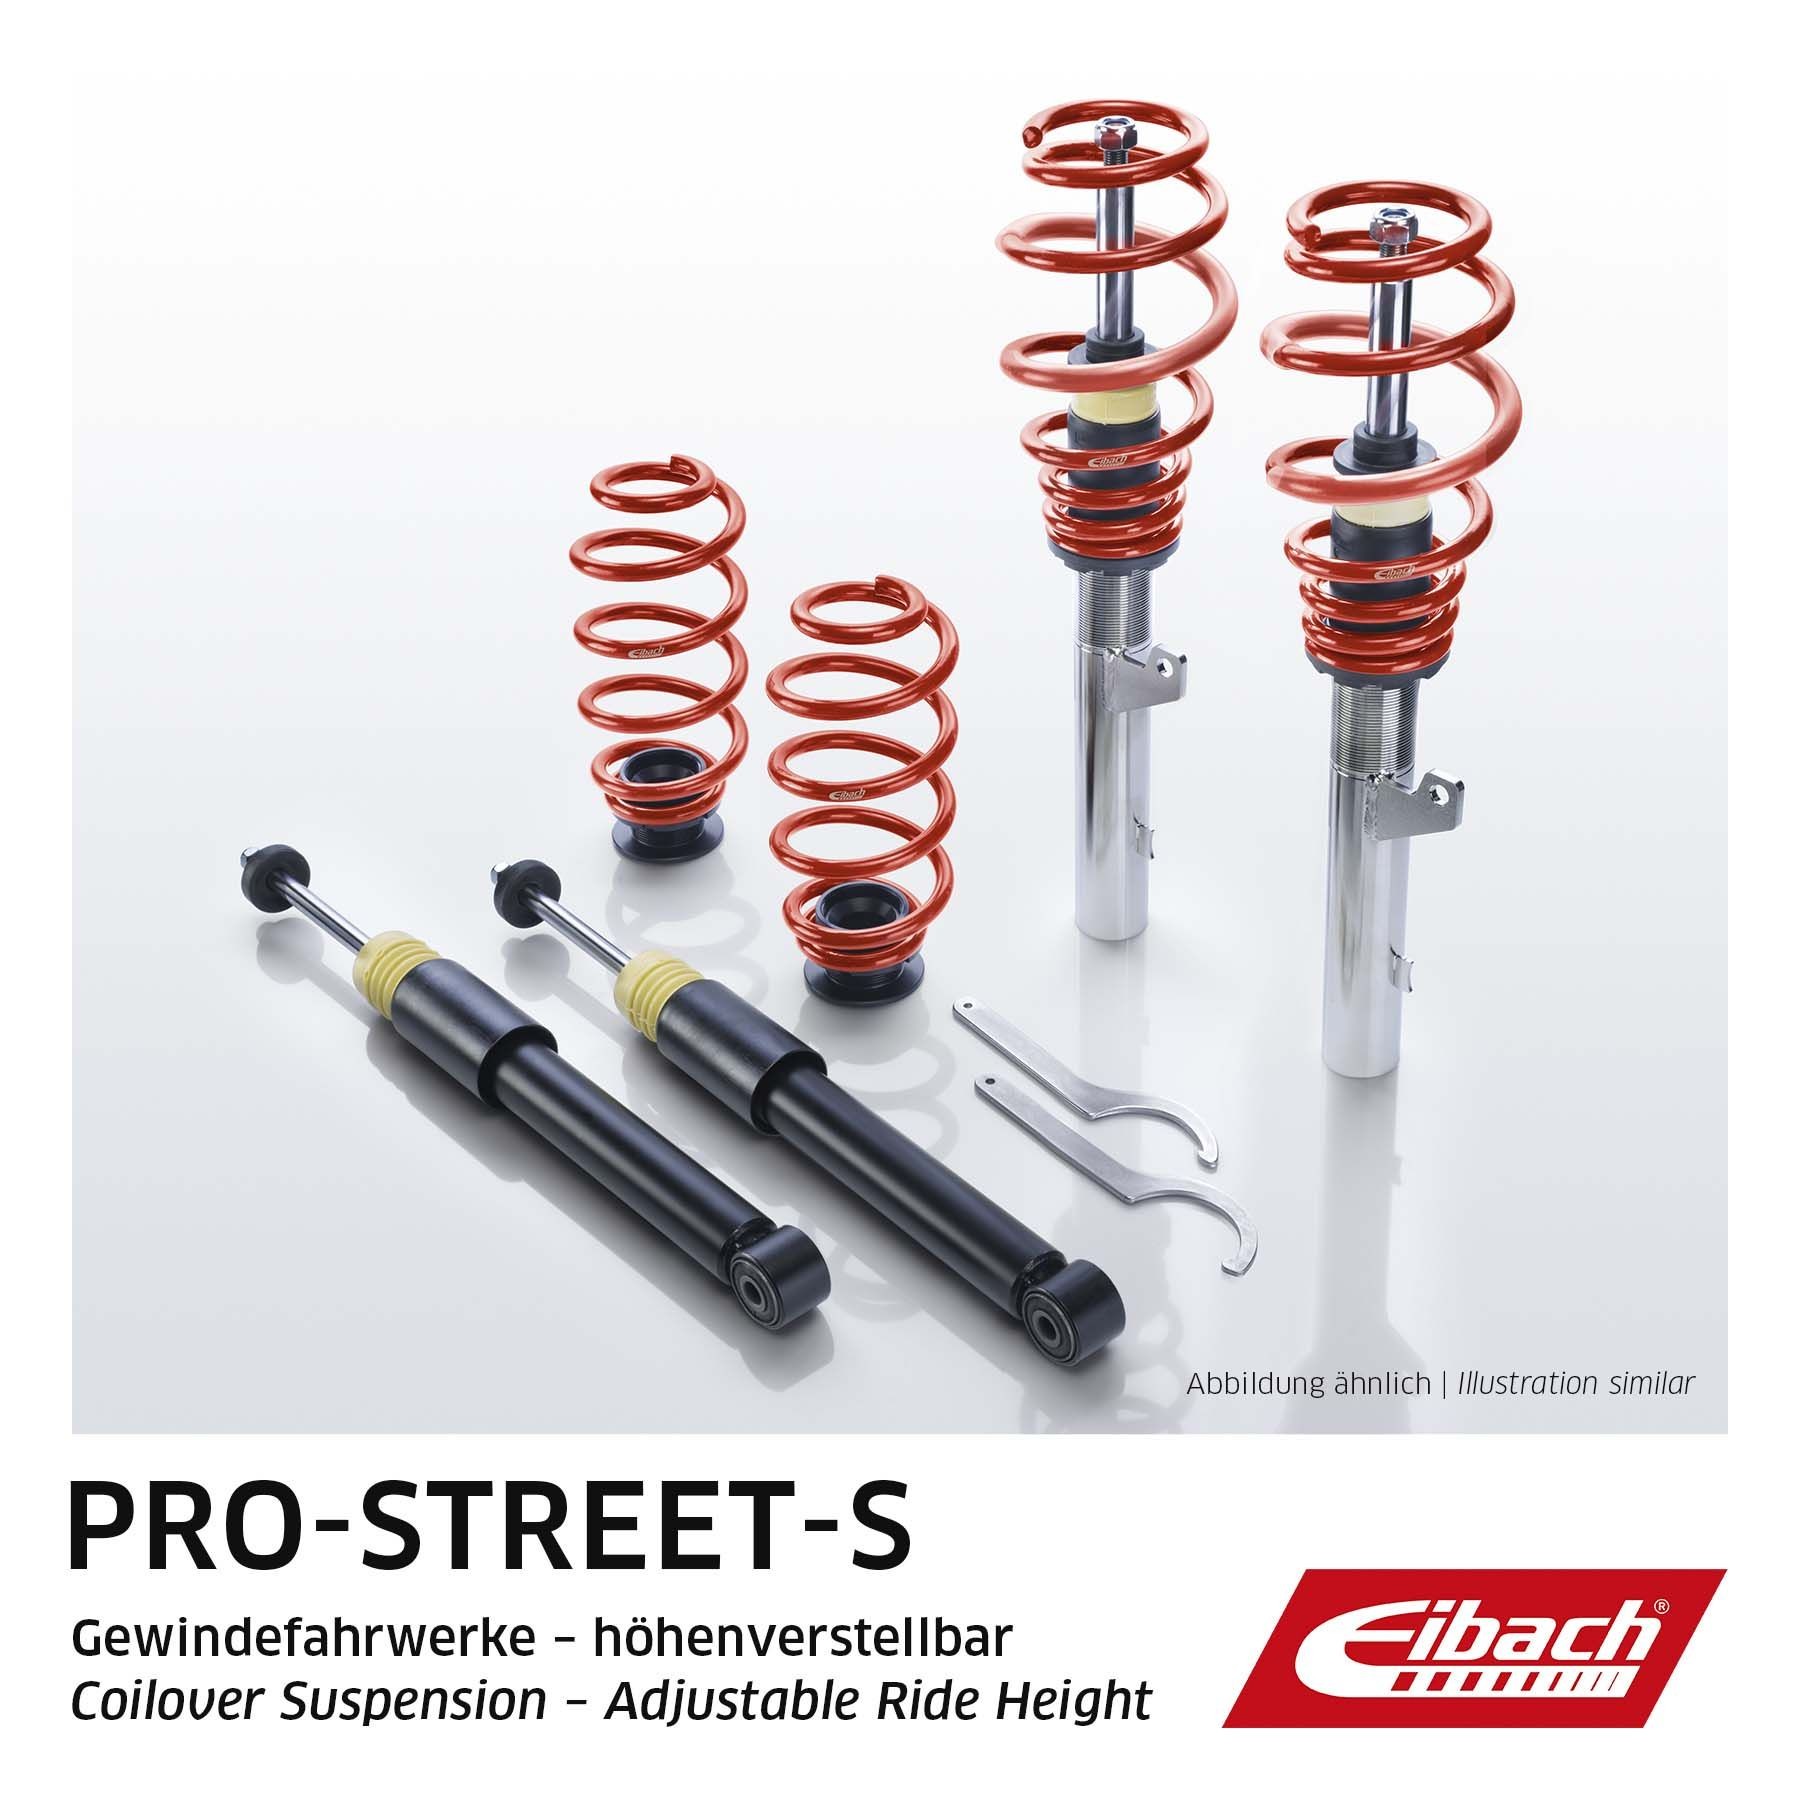 EIBACH PSS65-81-010-02-22 Volkswagen POLO 2020 Suspension kit, coil springs / shock absorbers